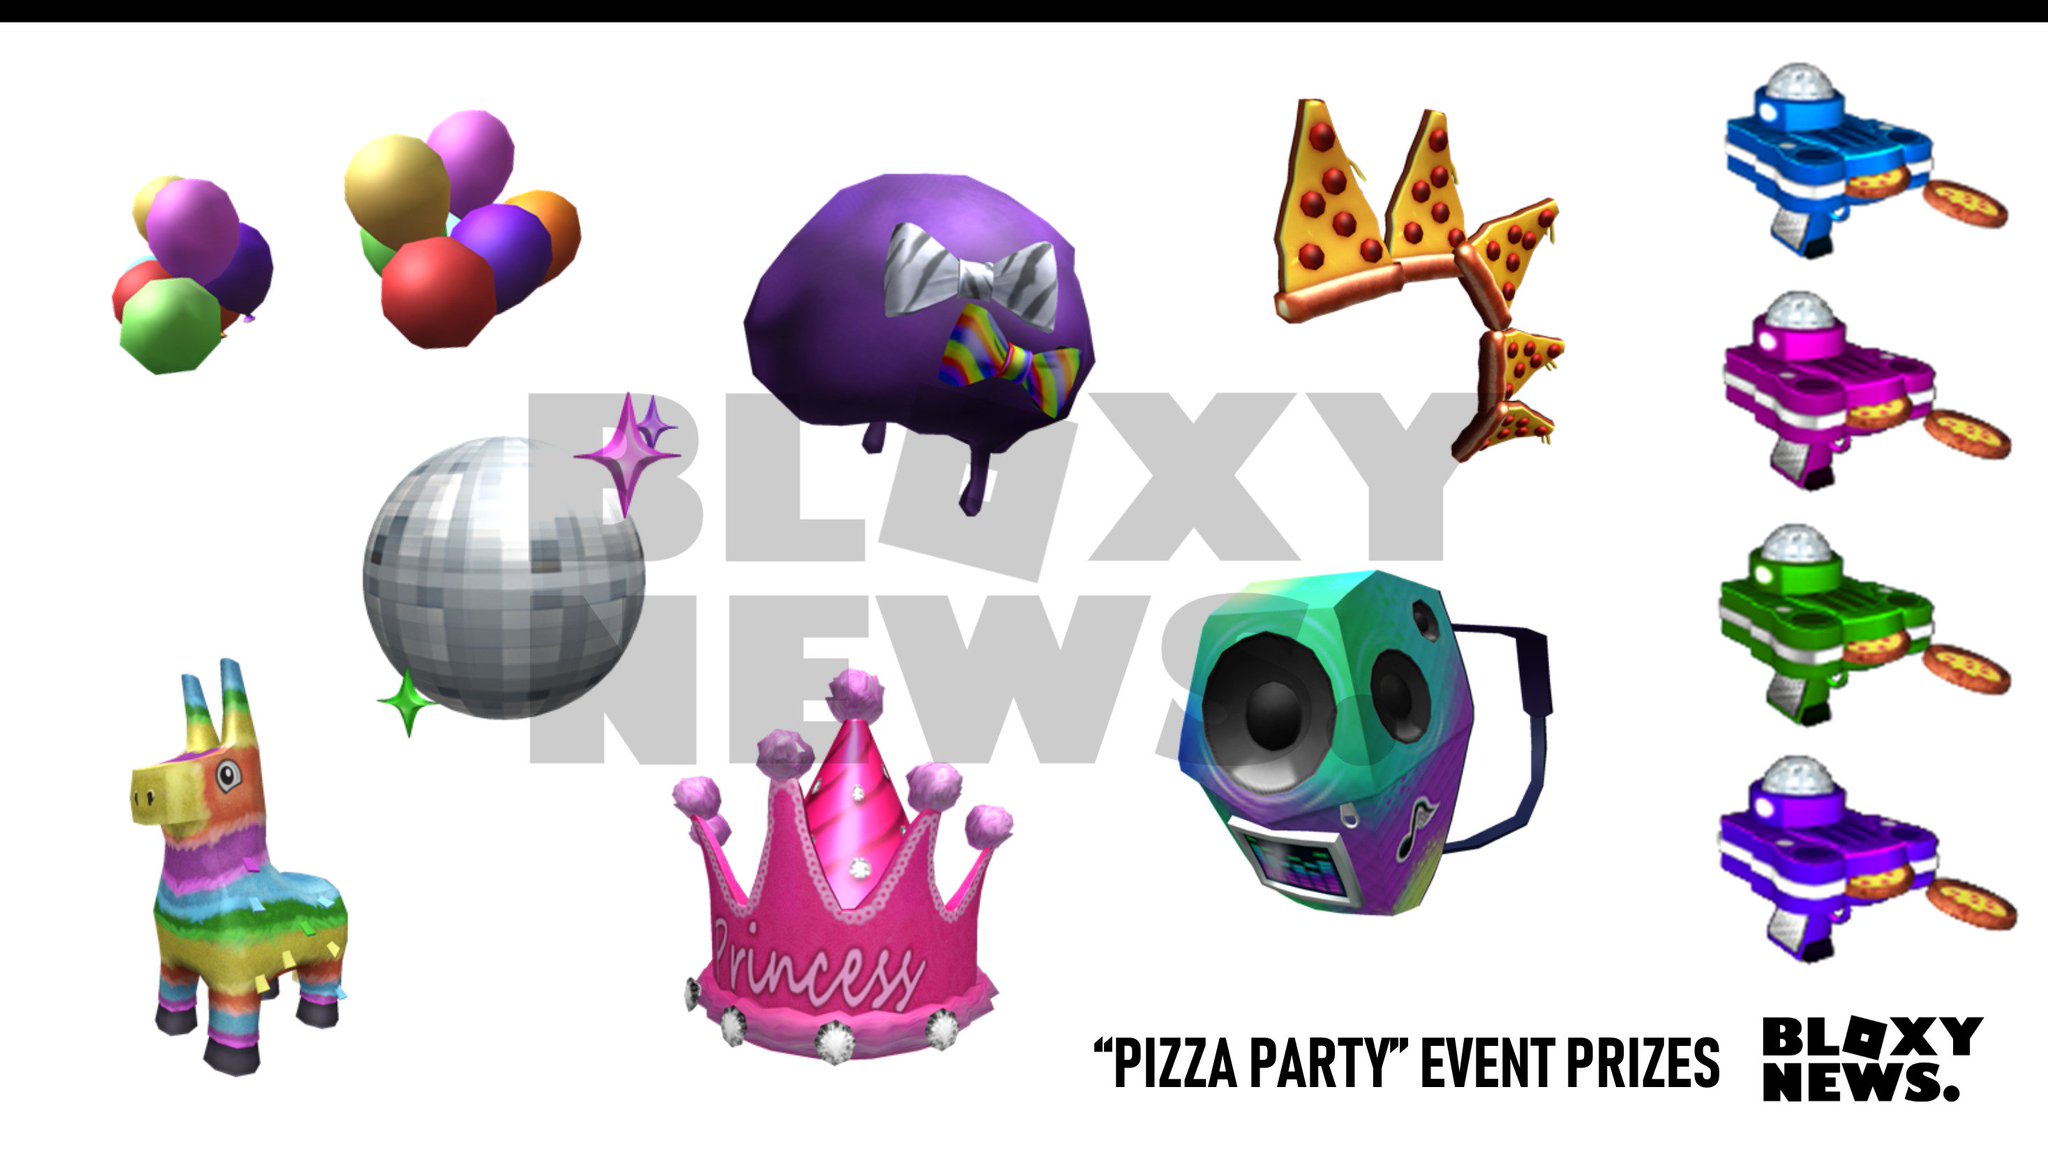 Bloxy News On Twitter Bloxynews All Prizes And Pizza Launchers For The Roblox Pizza Party Event Tomorrow - roblox pizza party how to get watermelon wings